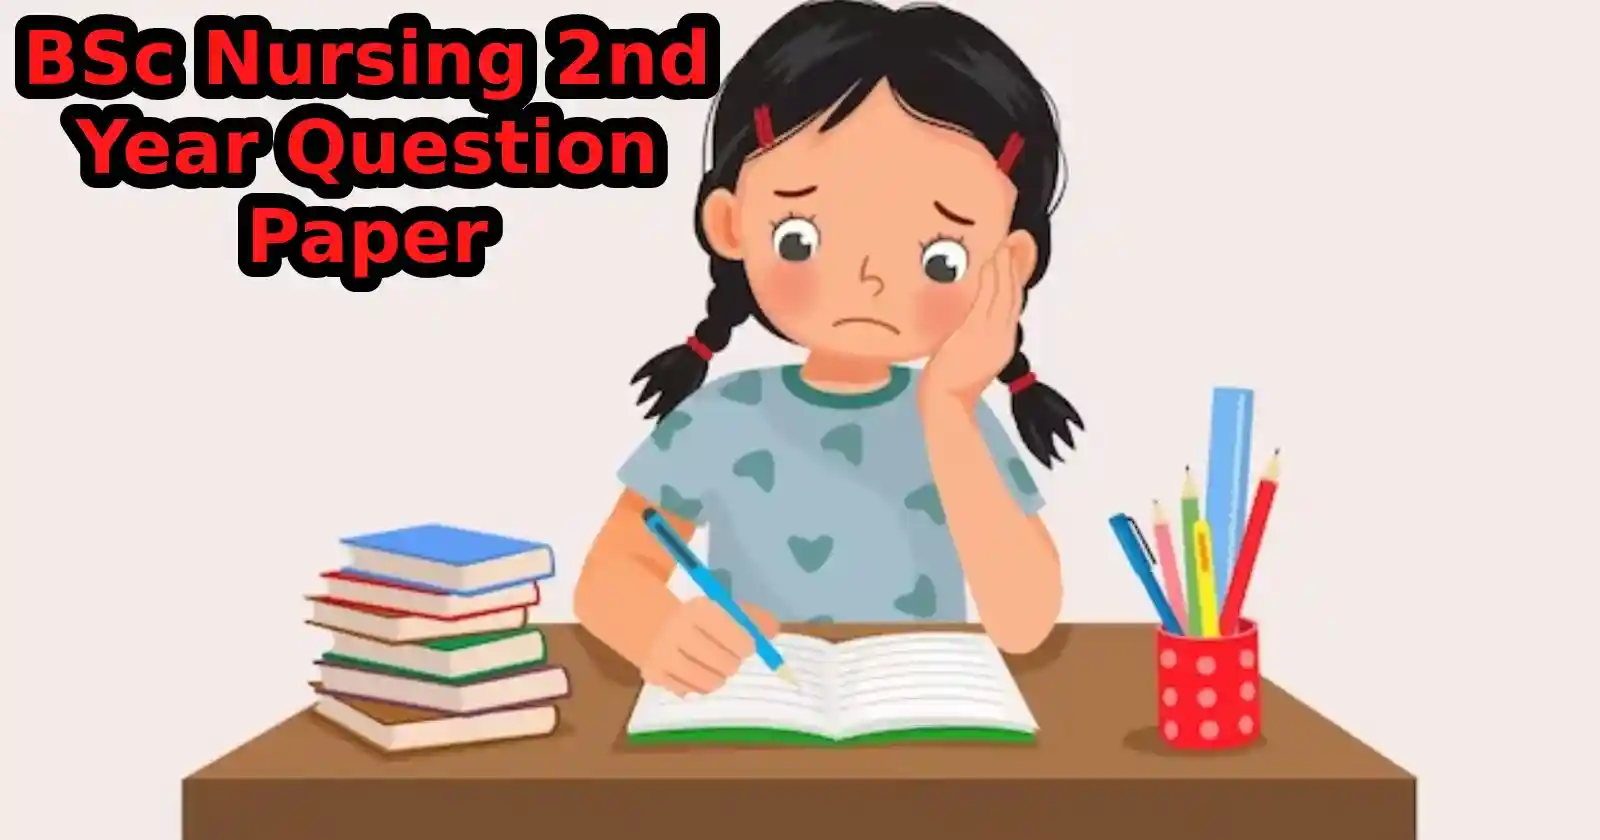 BSc Nursing 2nd Year Question Paper